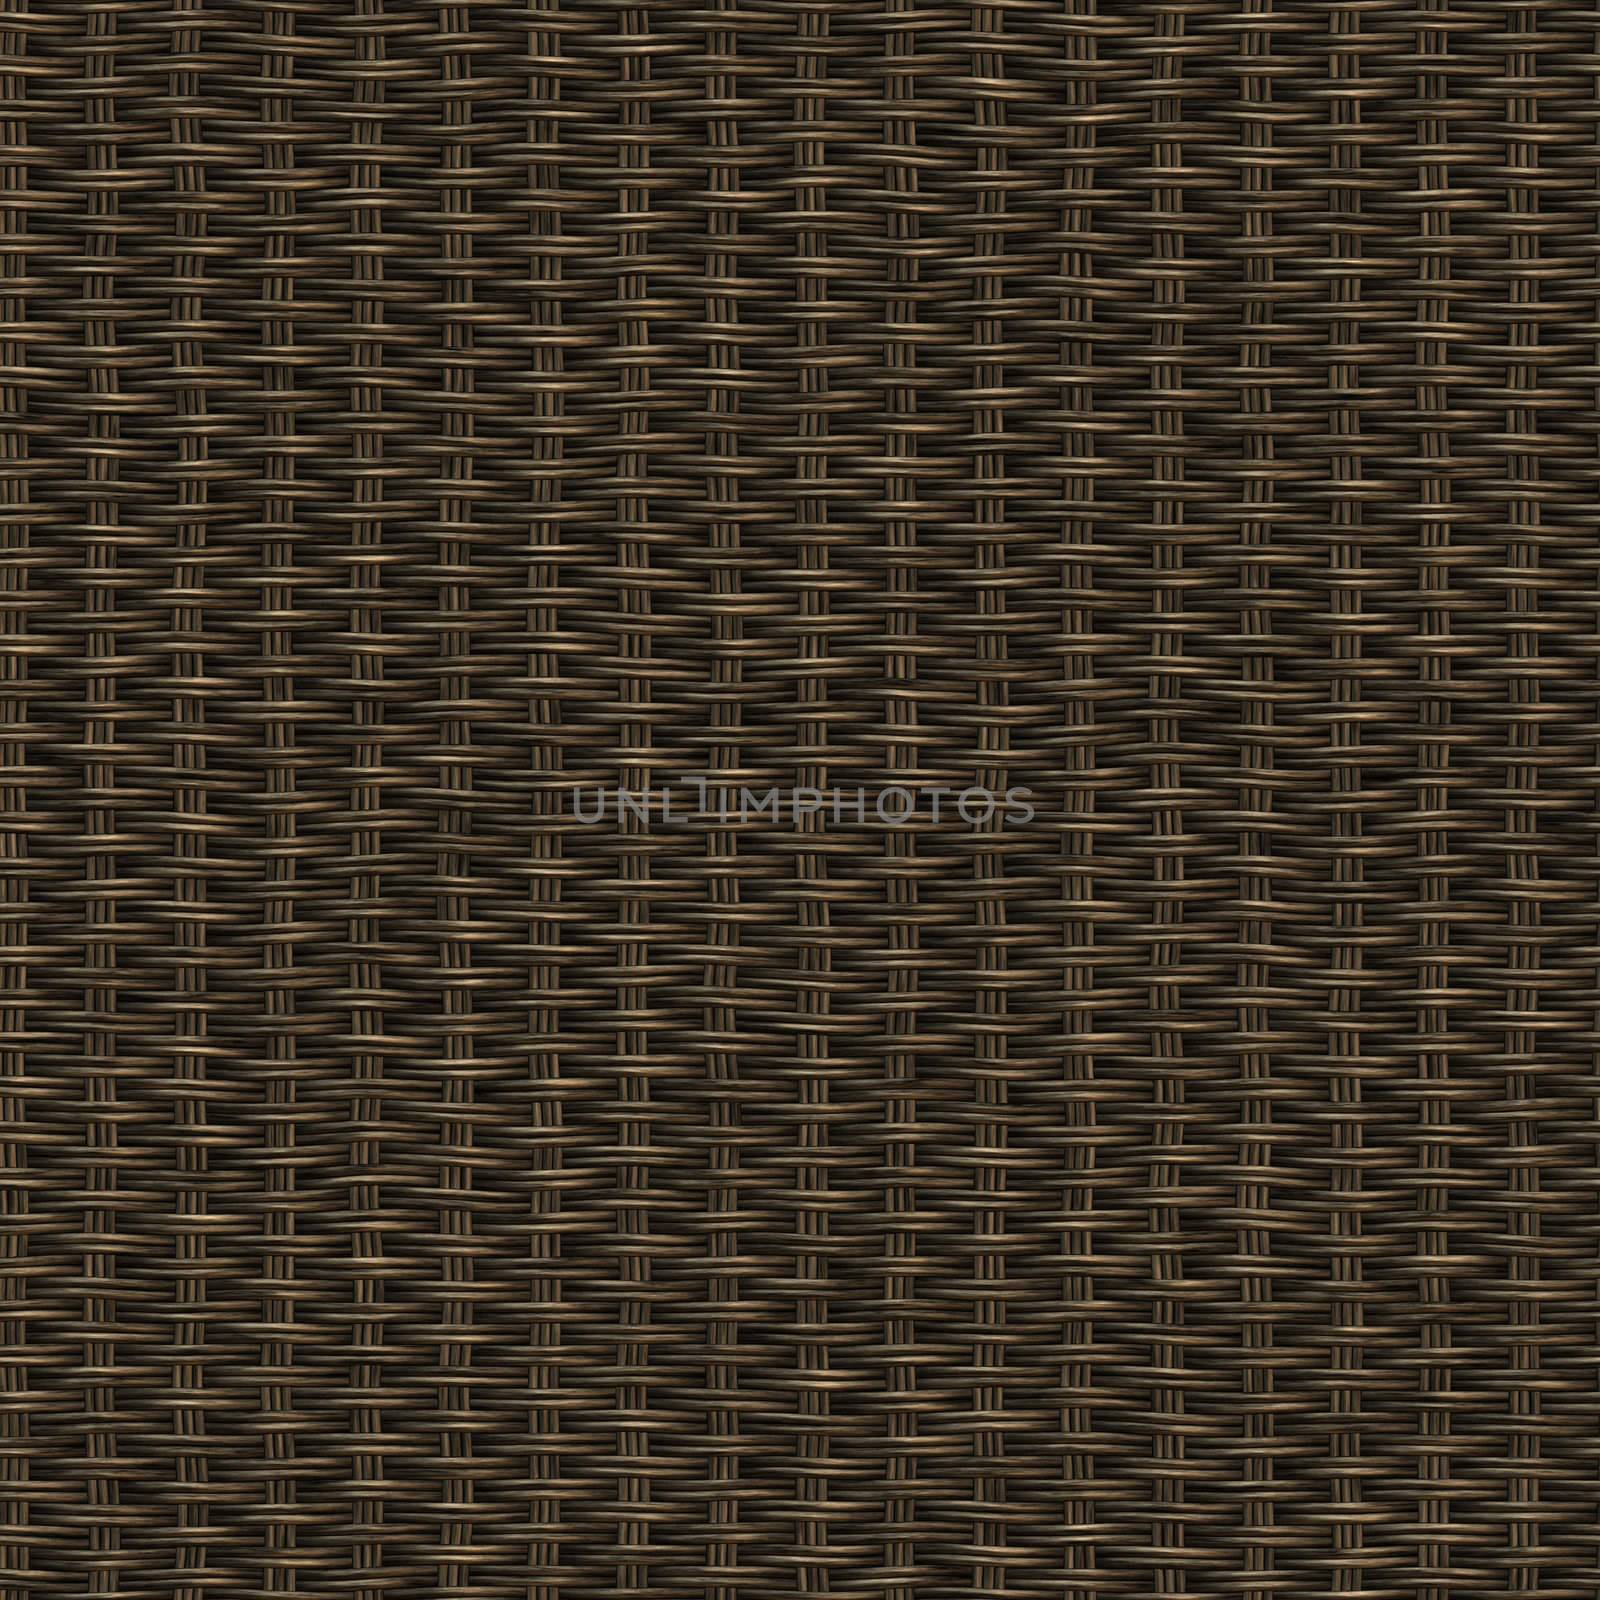 An illustration of a dark wooden weave